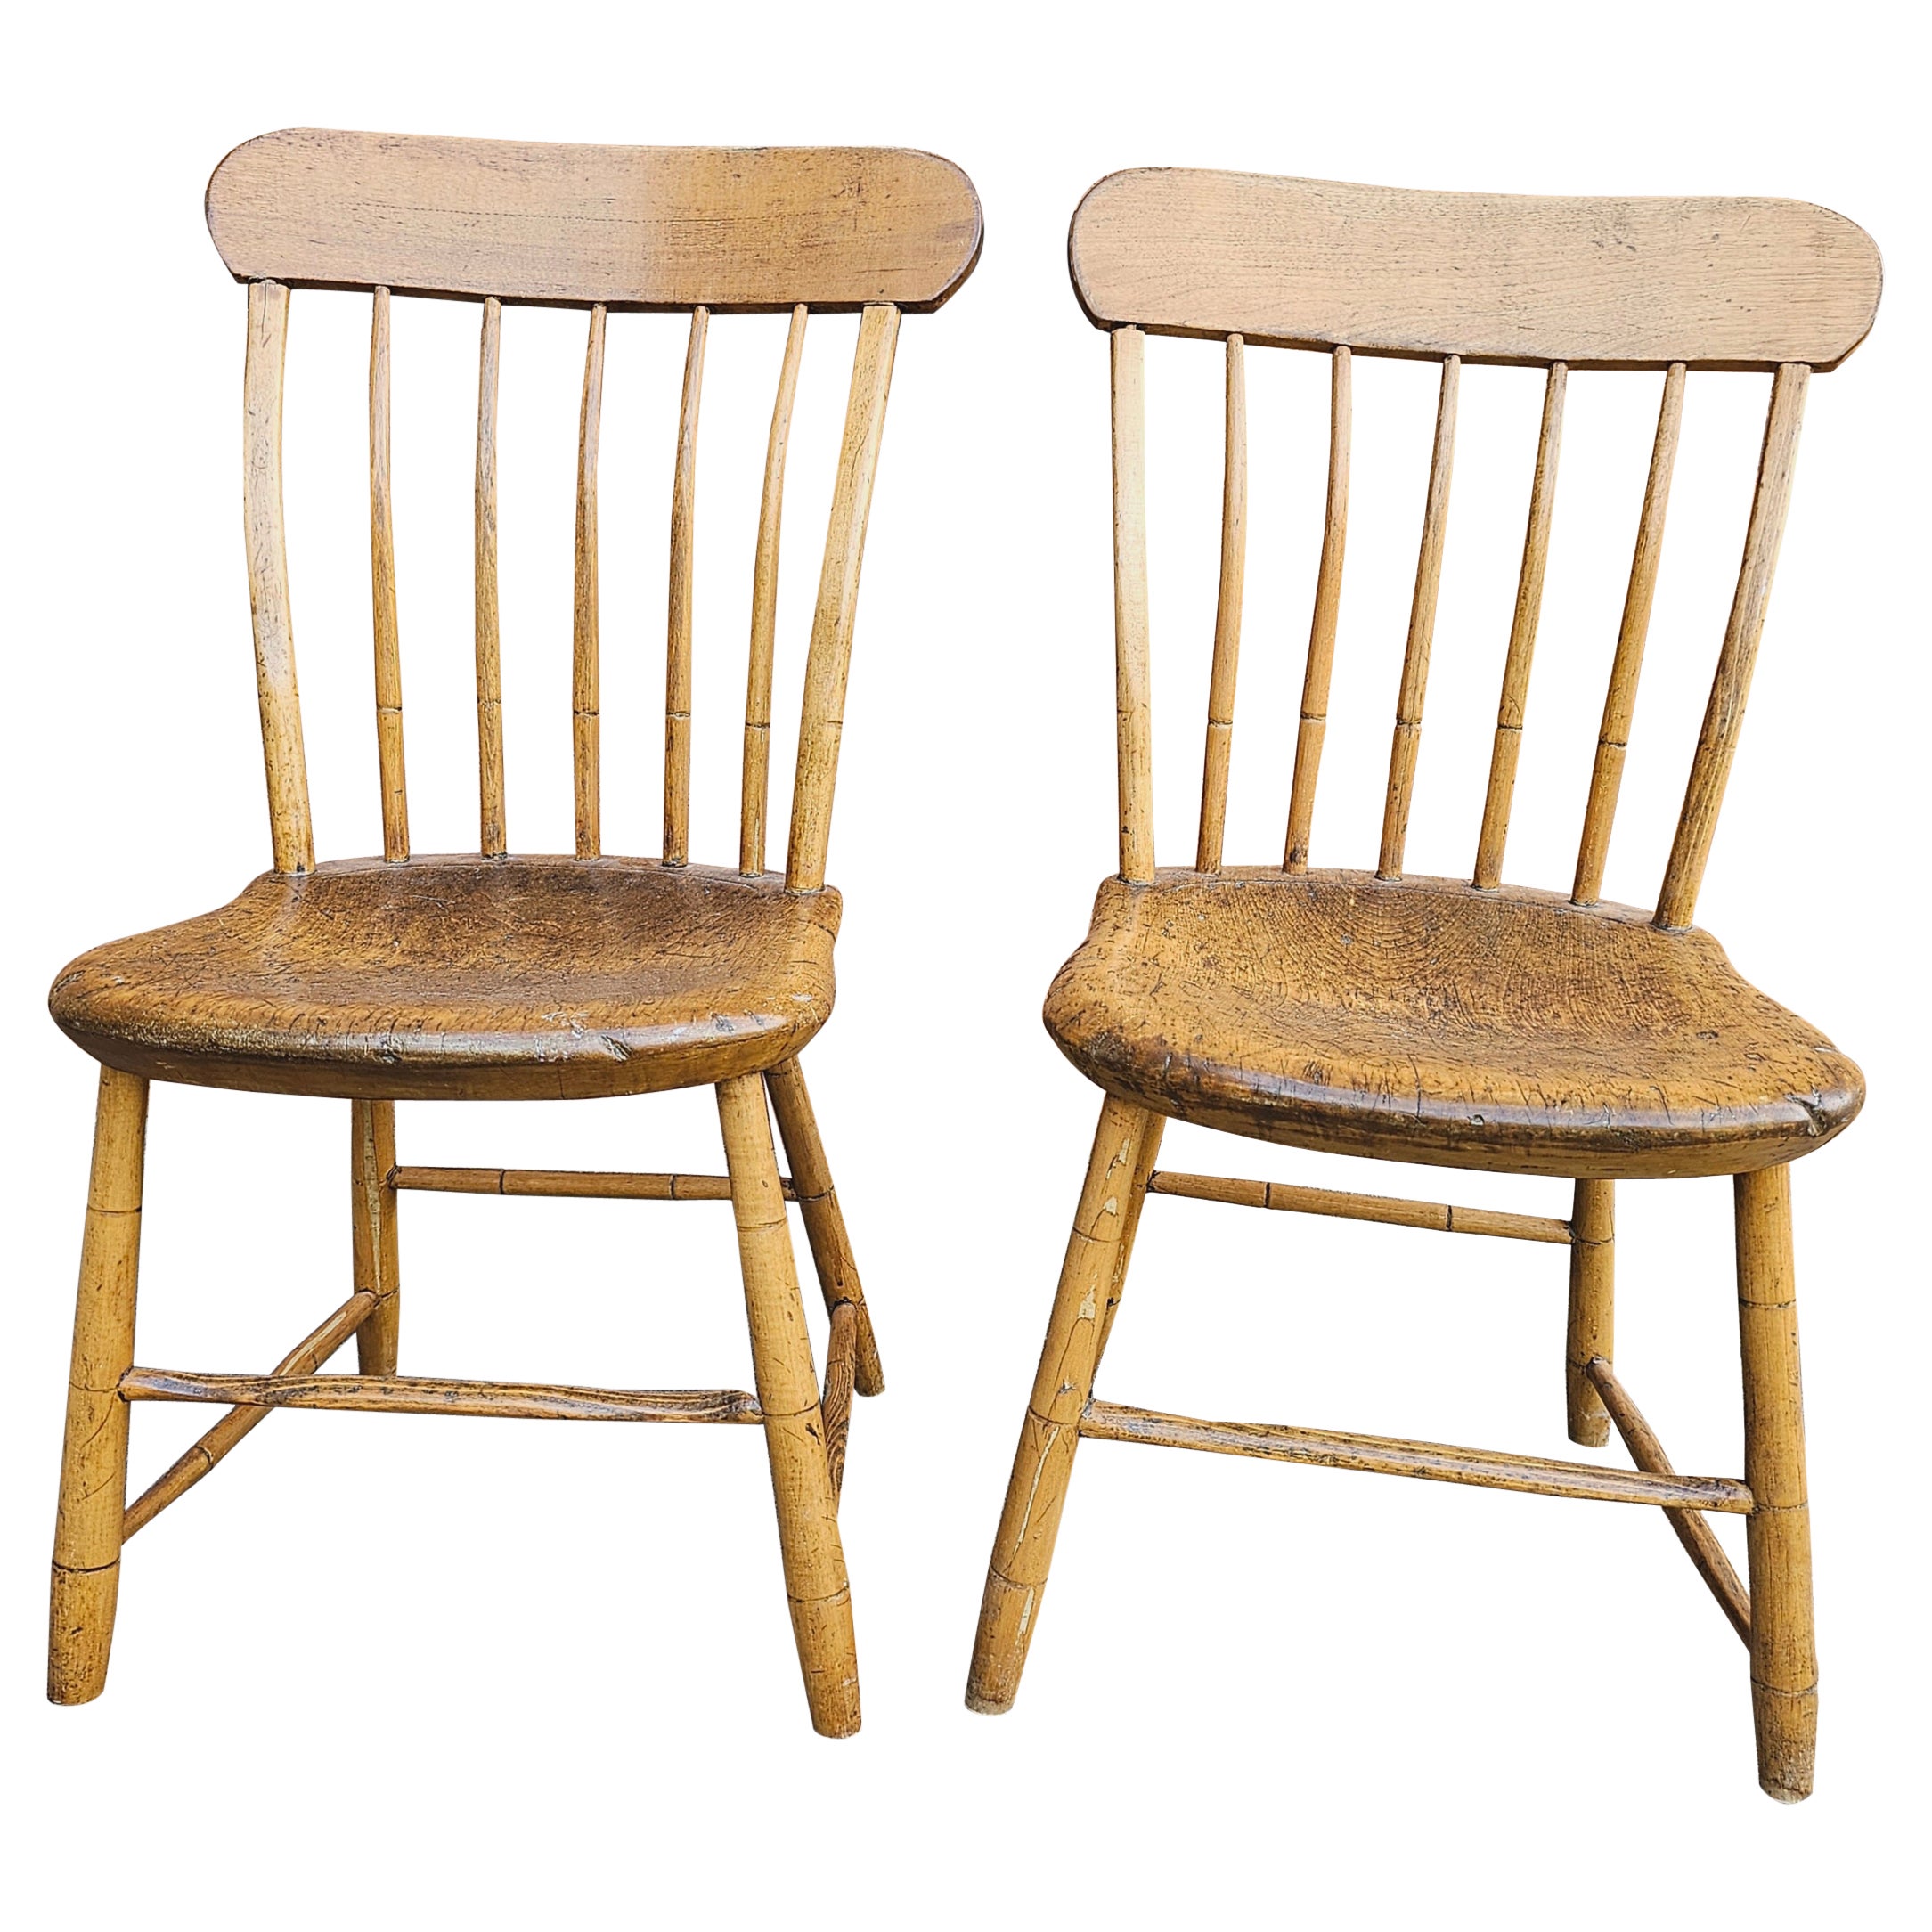 Pair of Early American Patinated Maple Plank Chairs, Circa Mid 19th Century. Great patina. Not just for decorative purpose only. Very sturdy for actual use. No wiggles or squikies. Measures 16